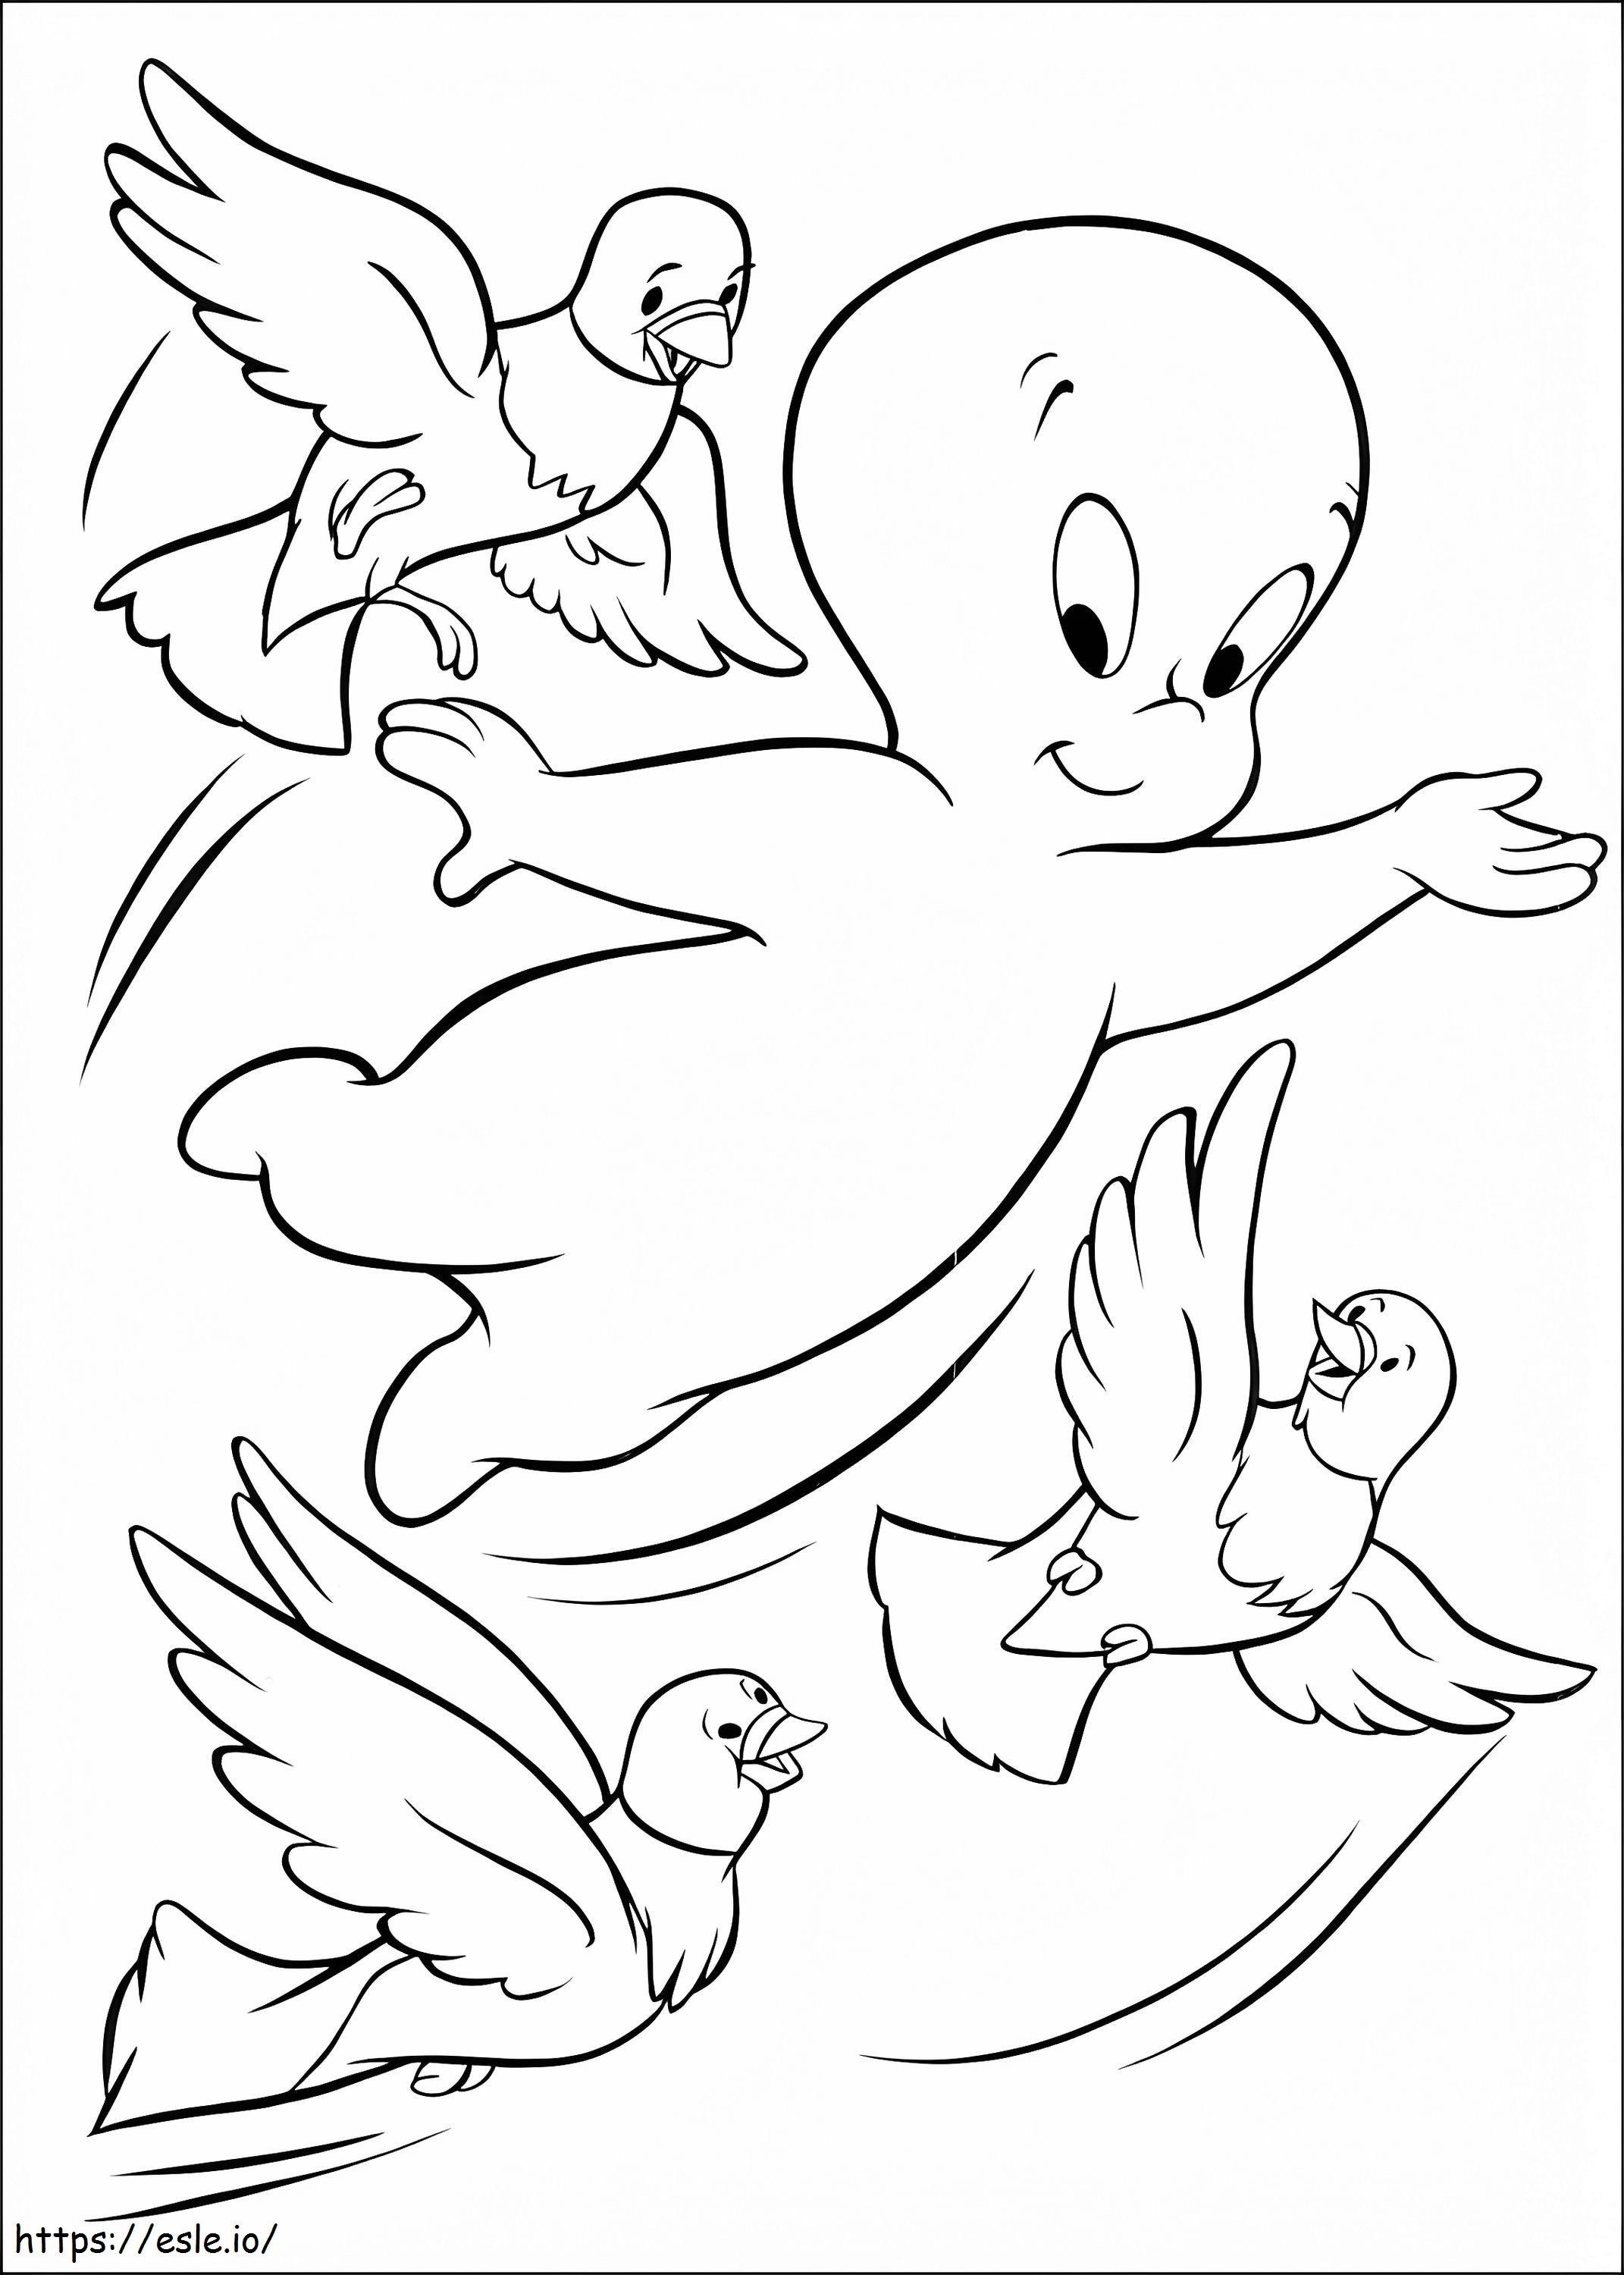 Casper With Birds A4 coloring page